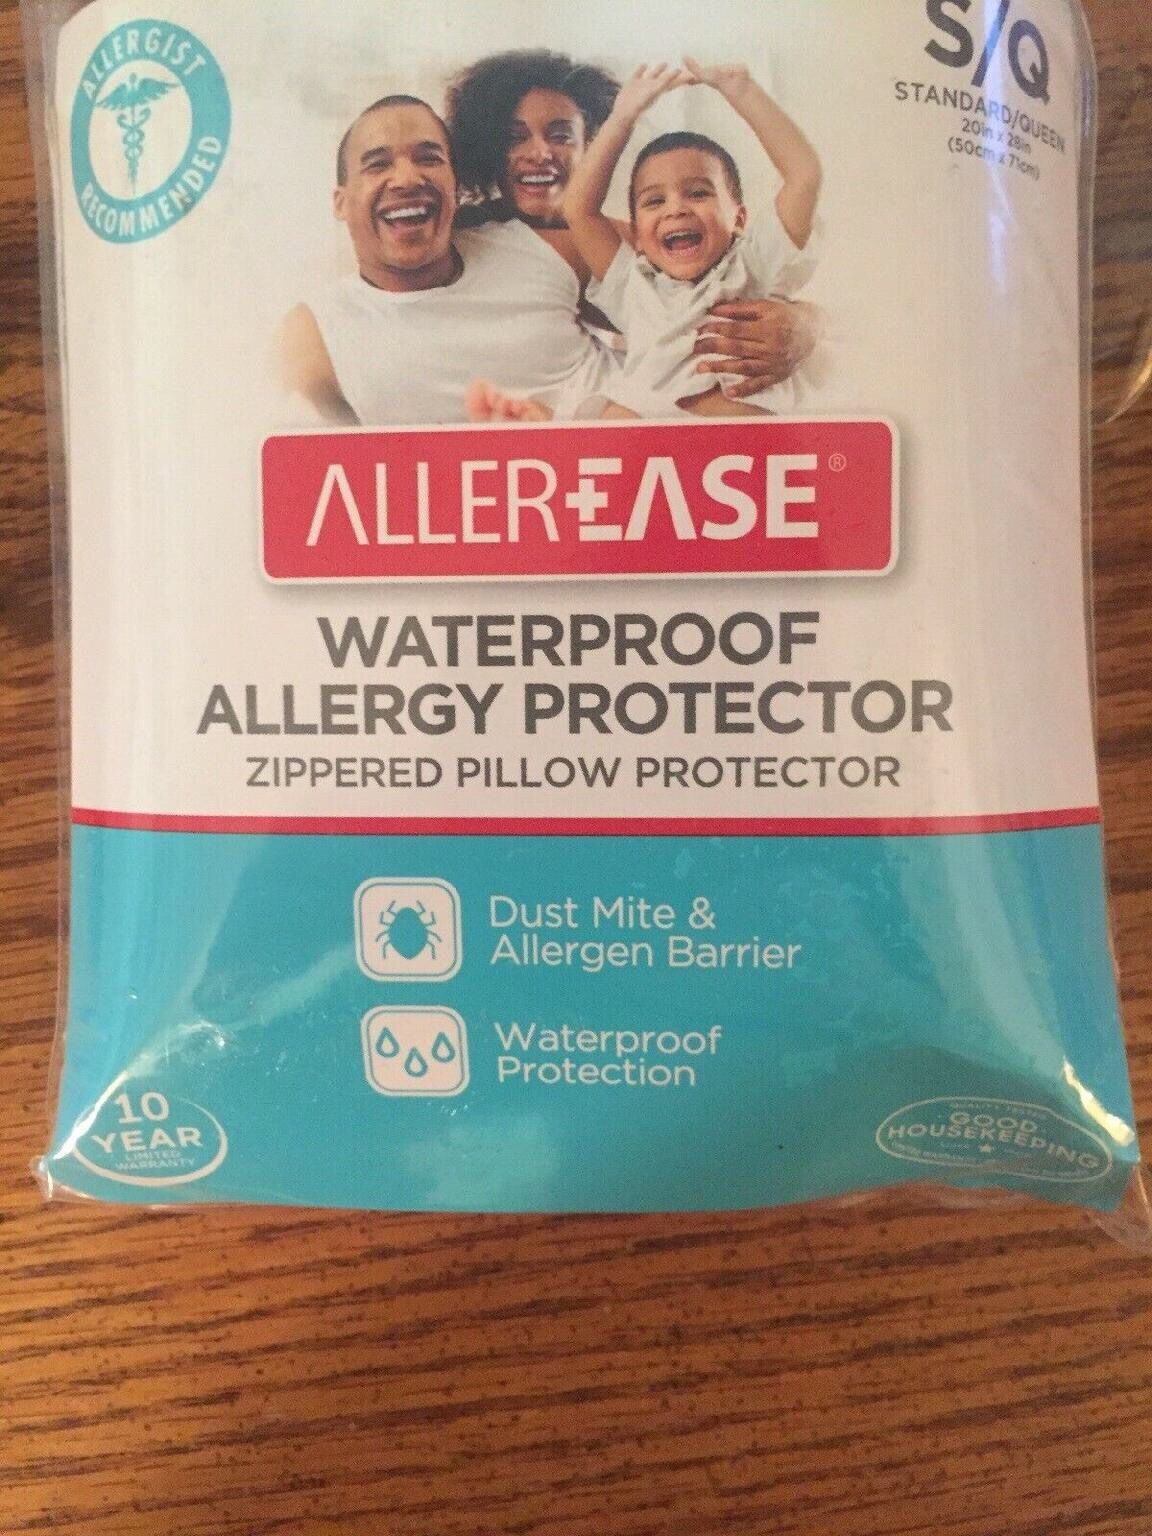 Allerease allergy pillow protectors 2 available price for one New